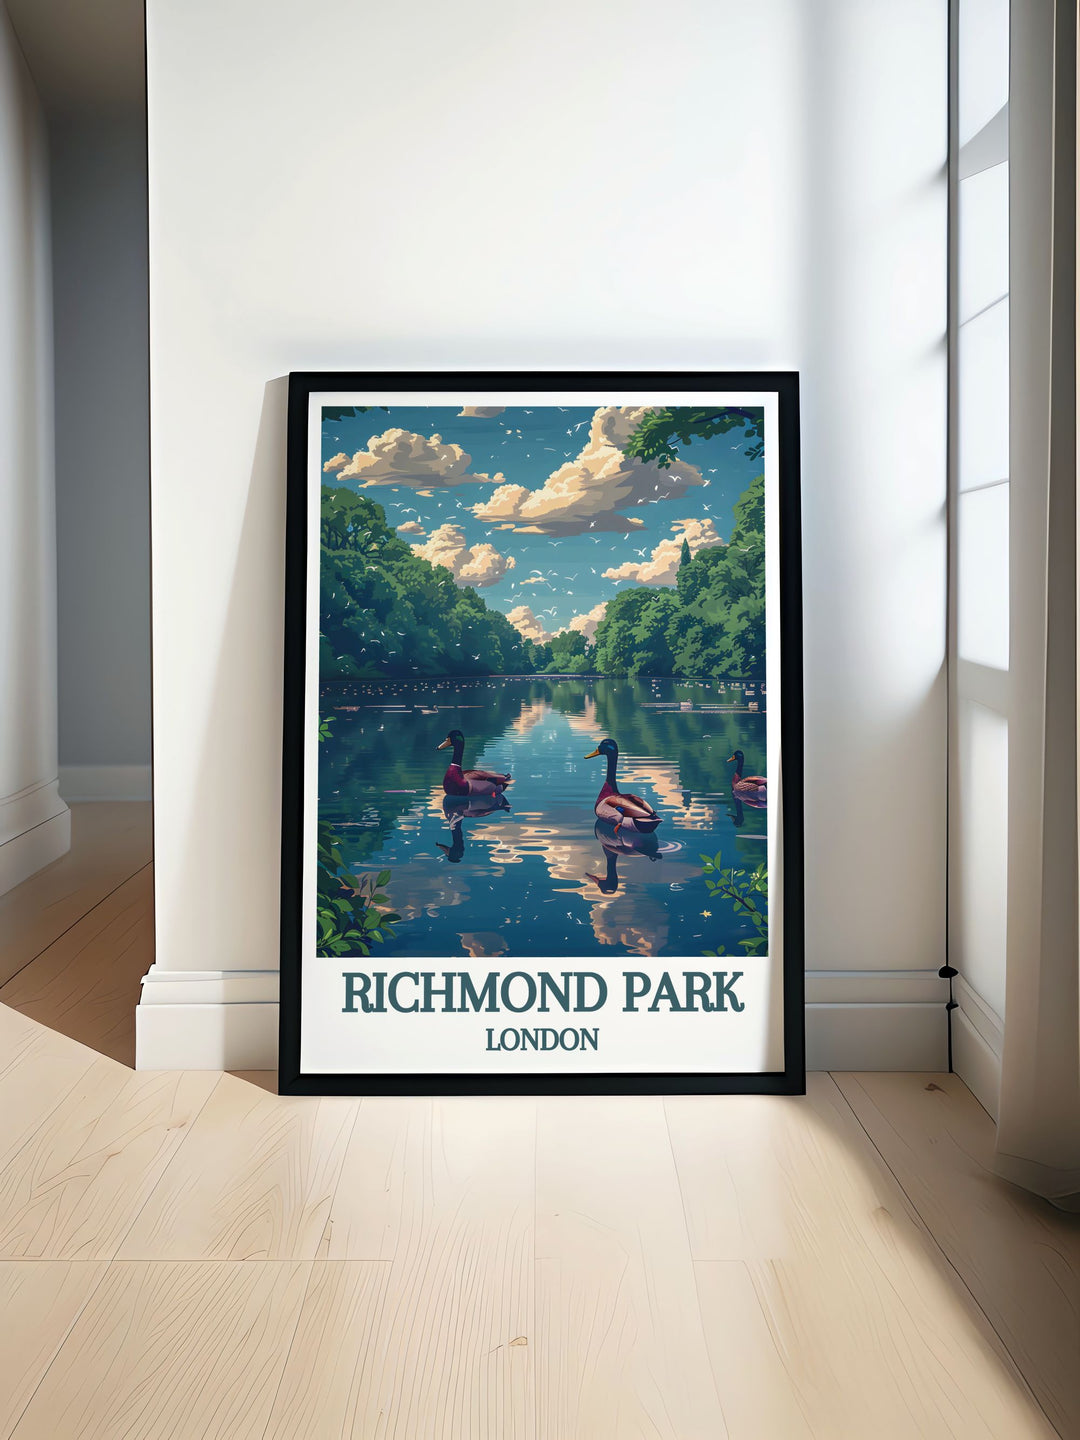 Pen Ponds Modern Wall Decor capturing the serene beauty of Londons Richmond Park, perfect for adding a touch of tranquility to your home decor.